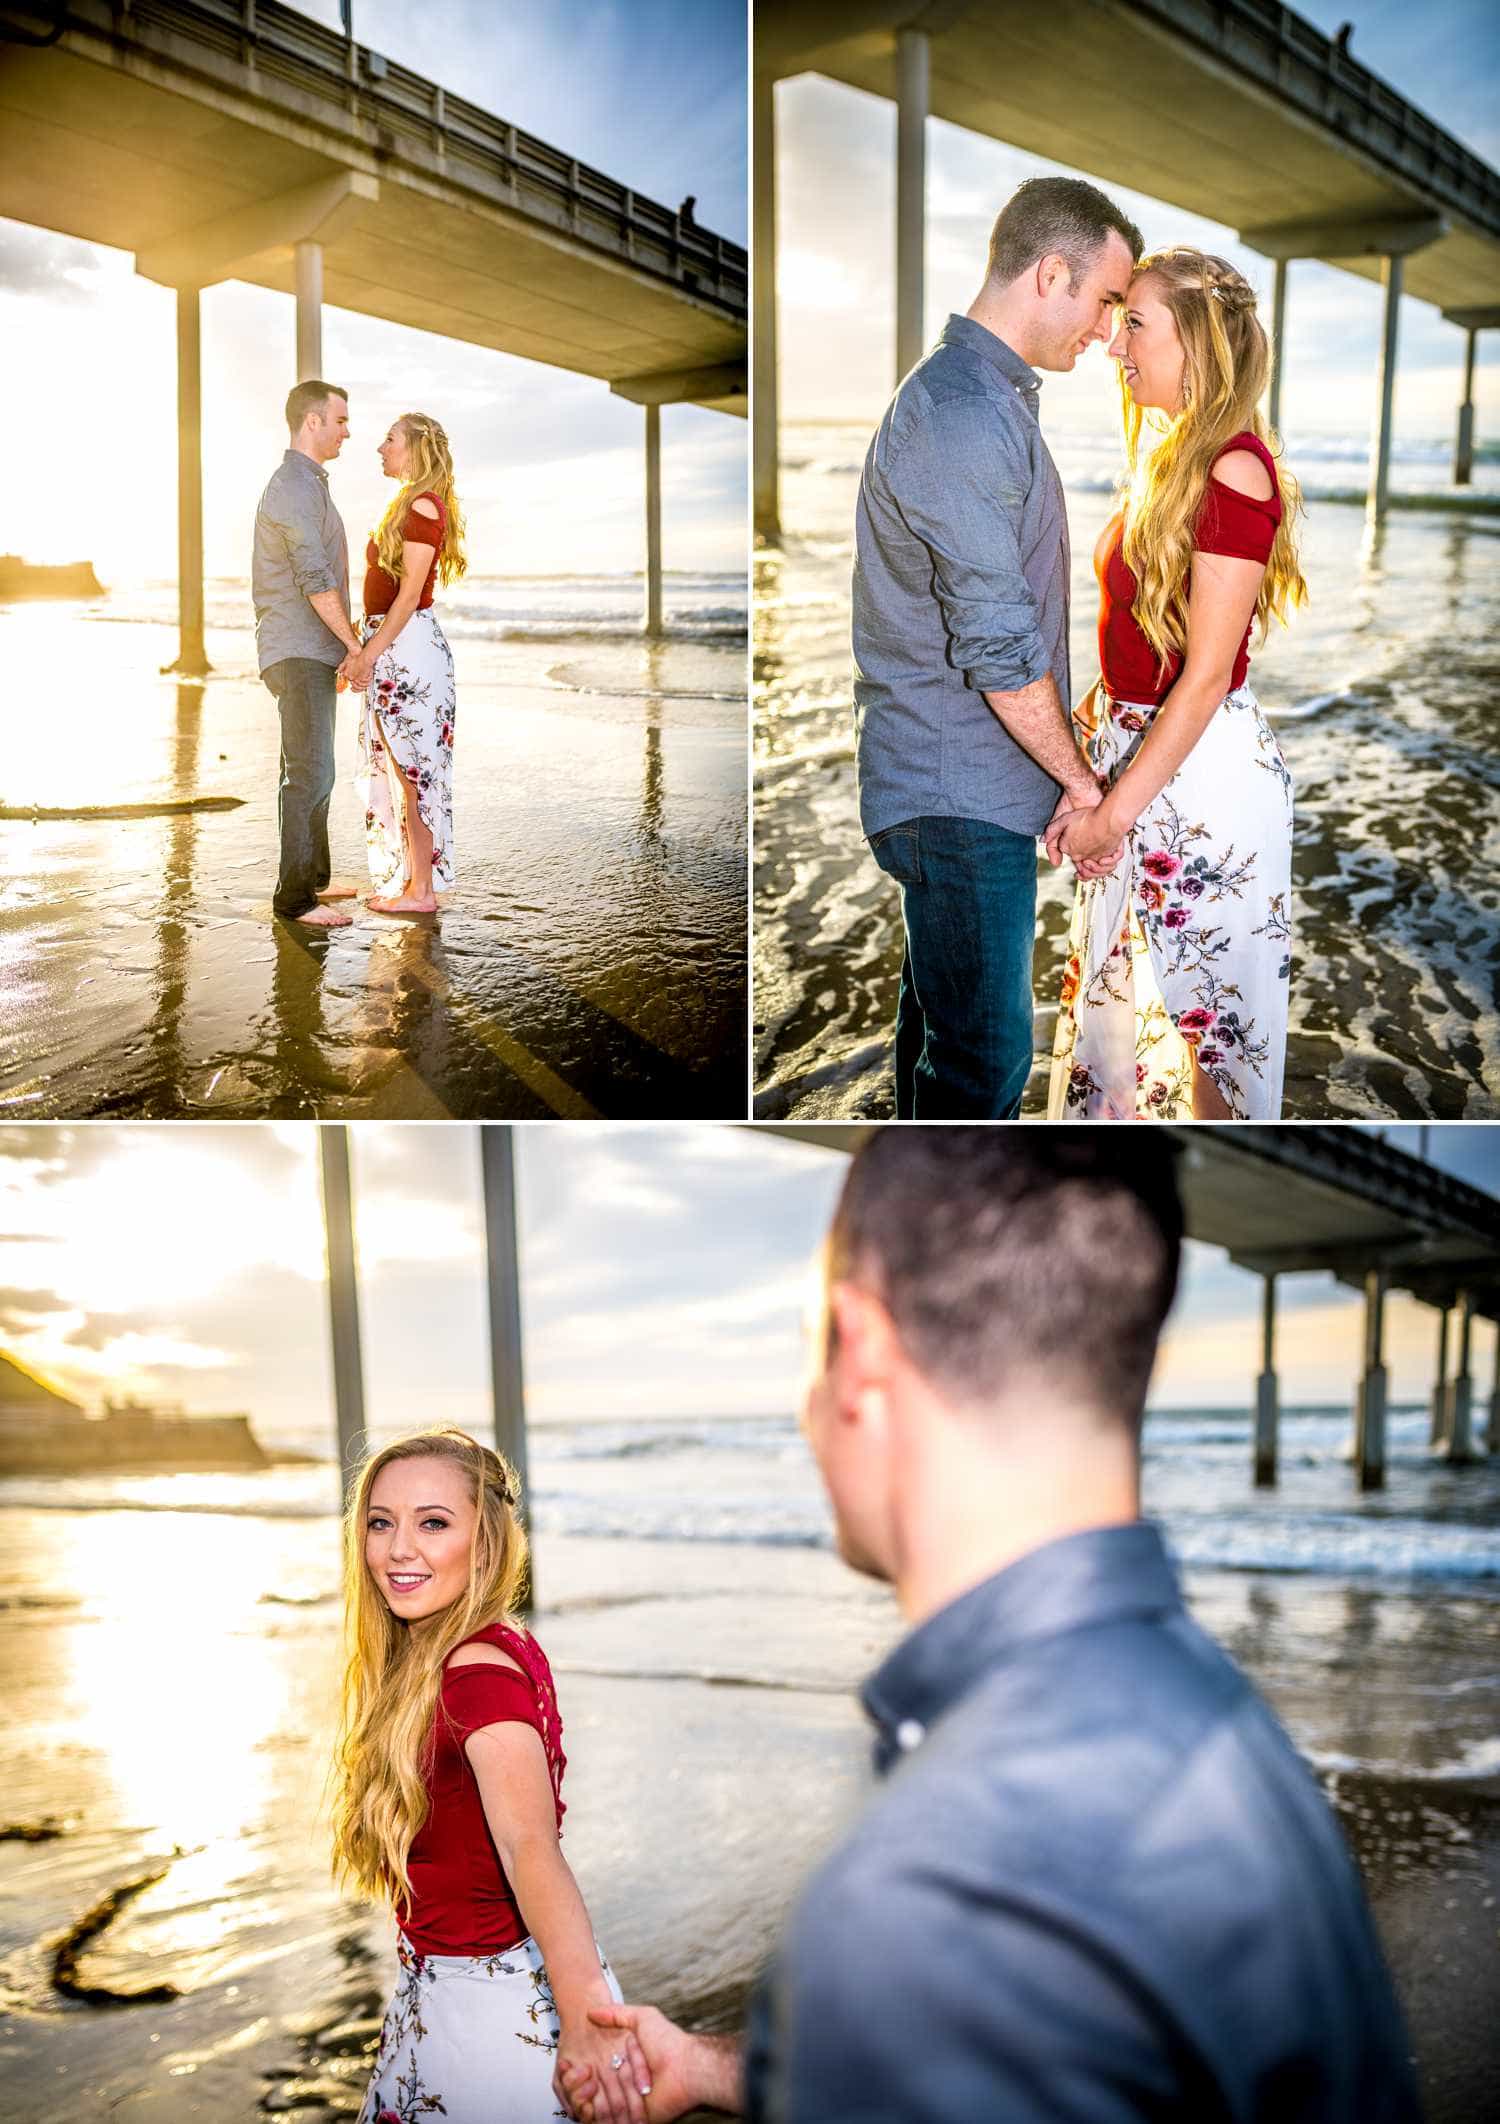 Sunset engagement session at the beach.